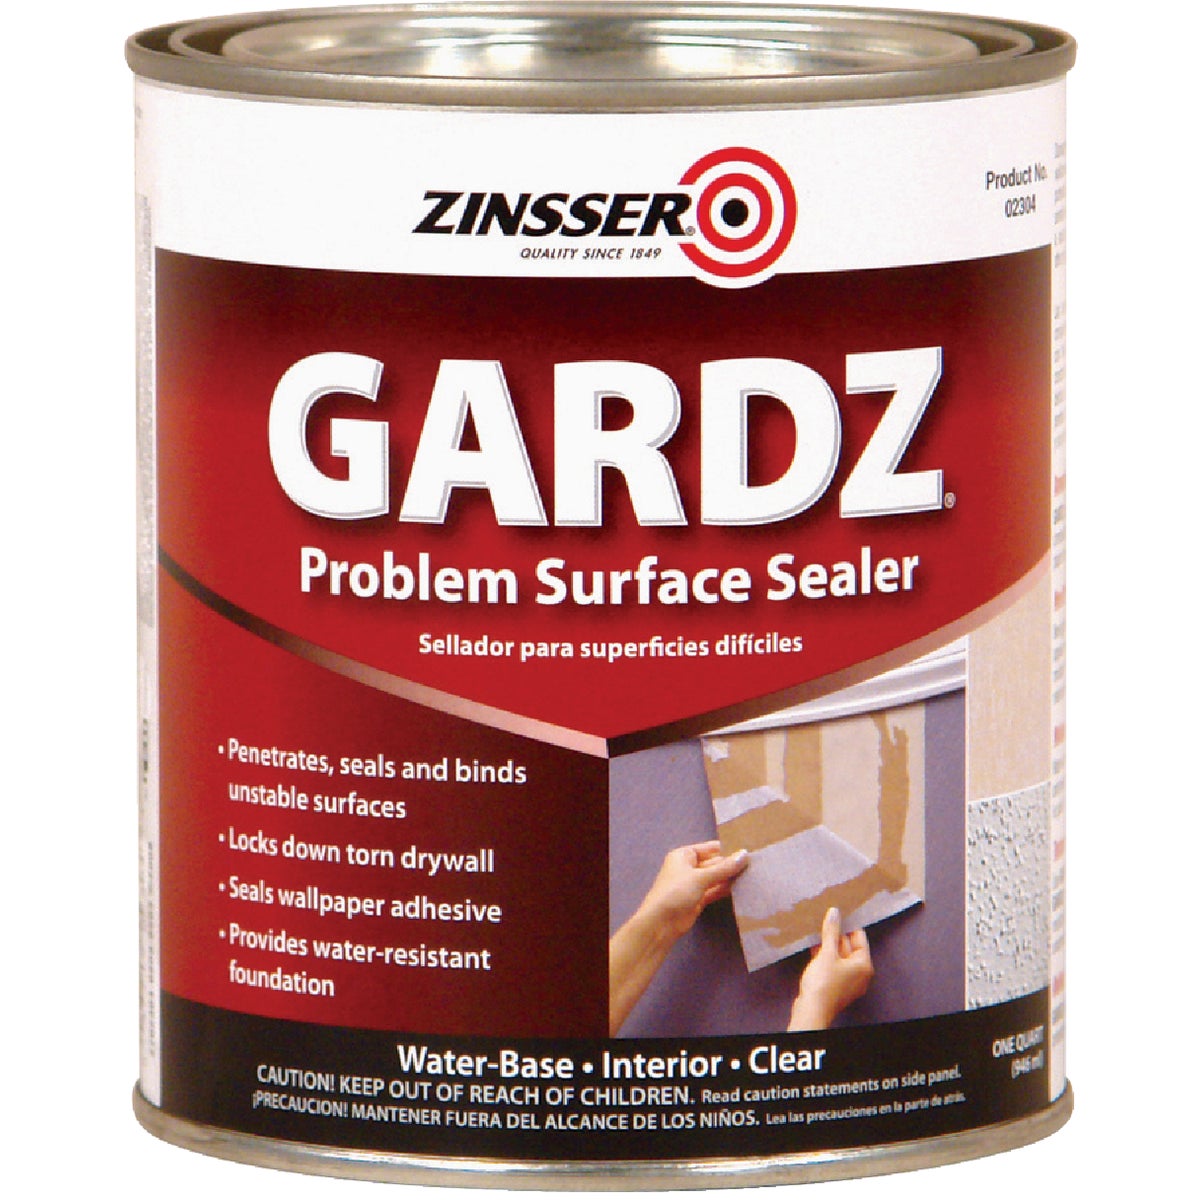 Item 784979, GARDZ is a clear, water-based sealer that penetrates and seals torn drywall